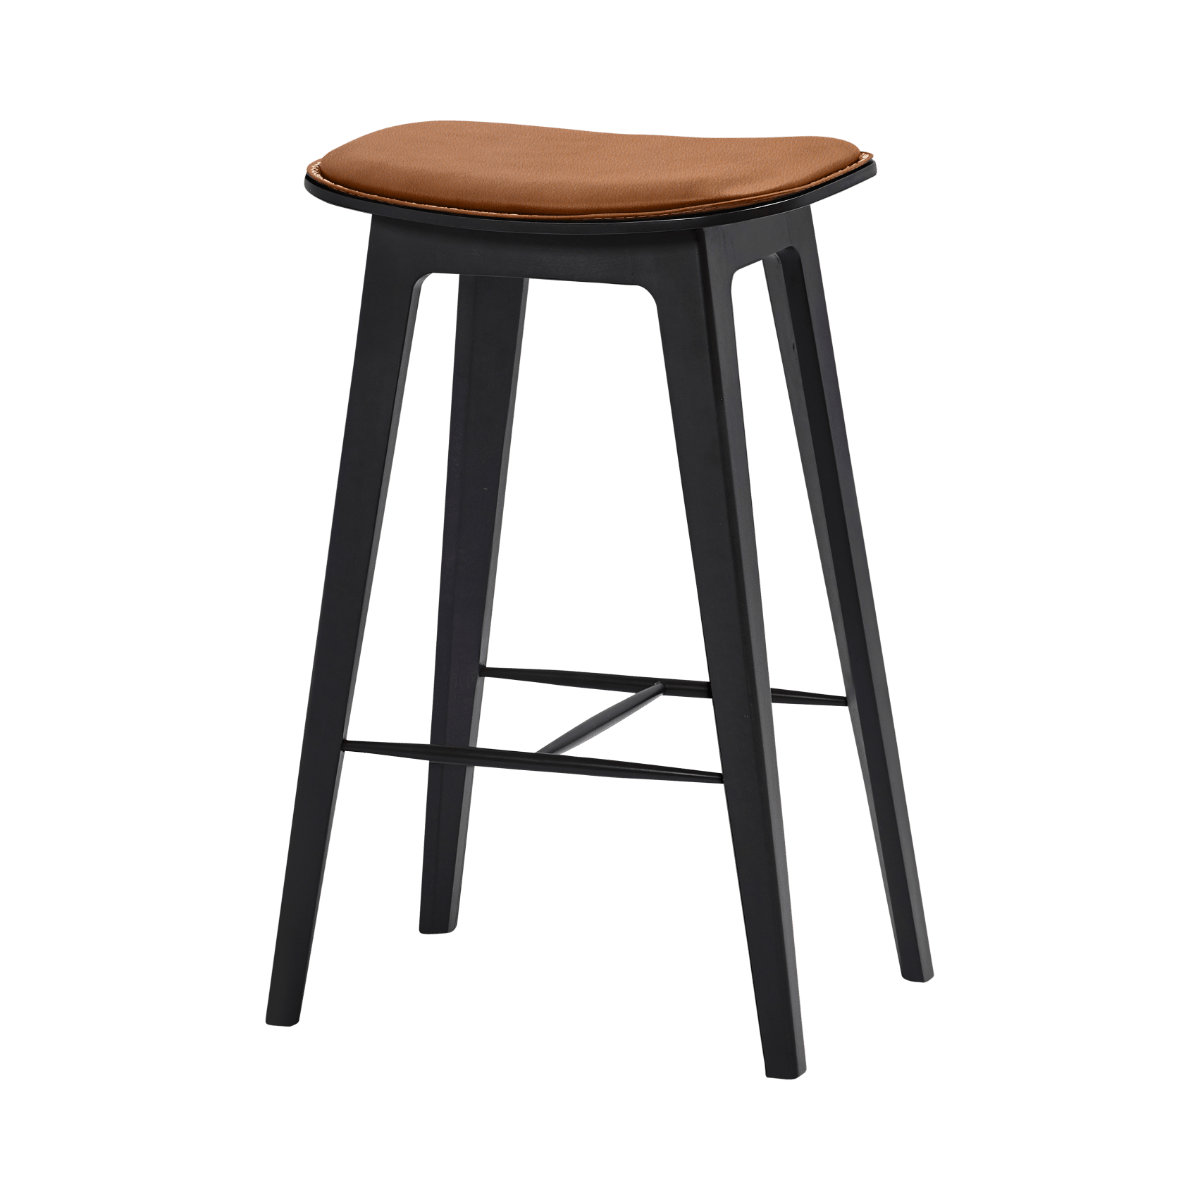 variant_8593217% | Nordic Bar Stool - Beech with stitches [Contract] - 73 cm Terra Safari | SACKit